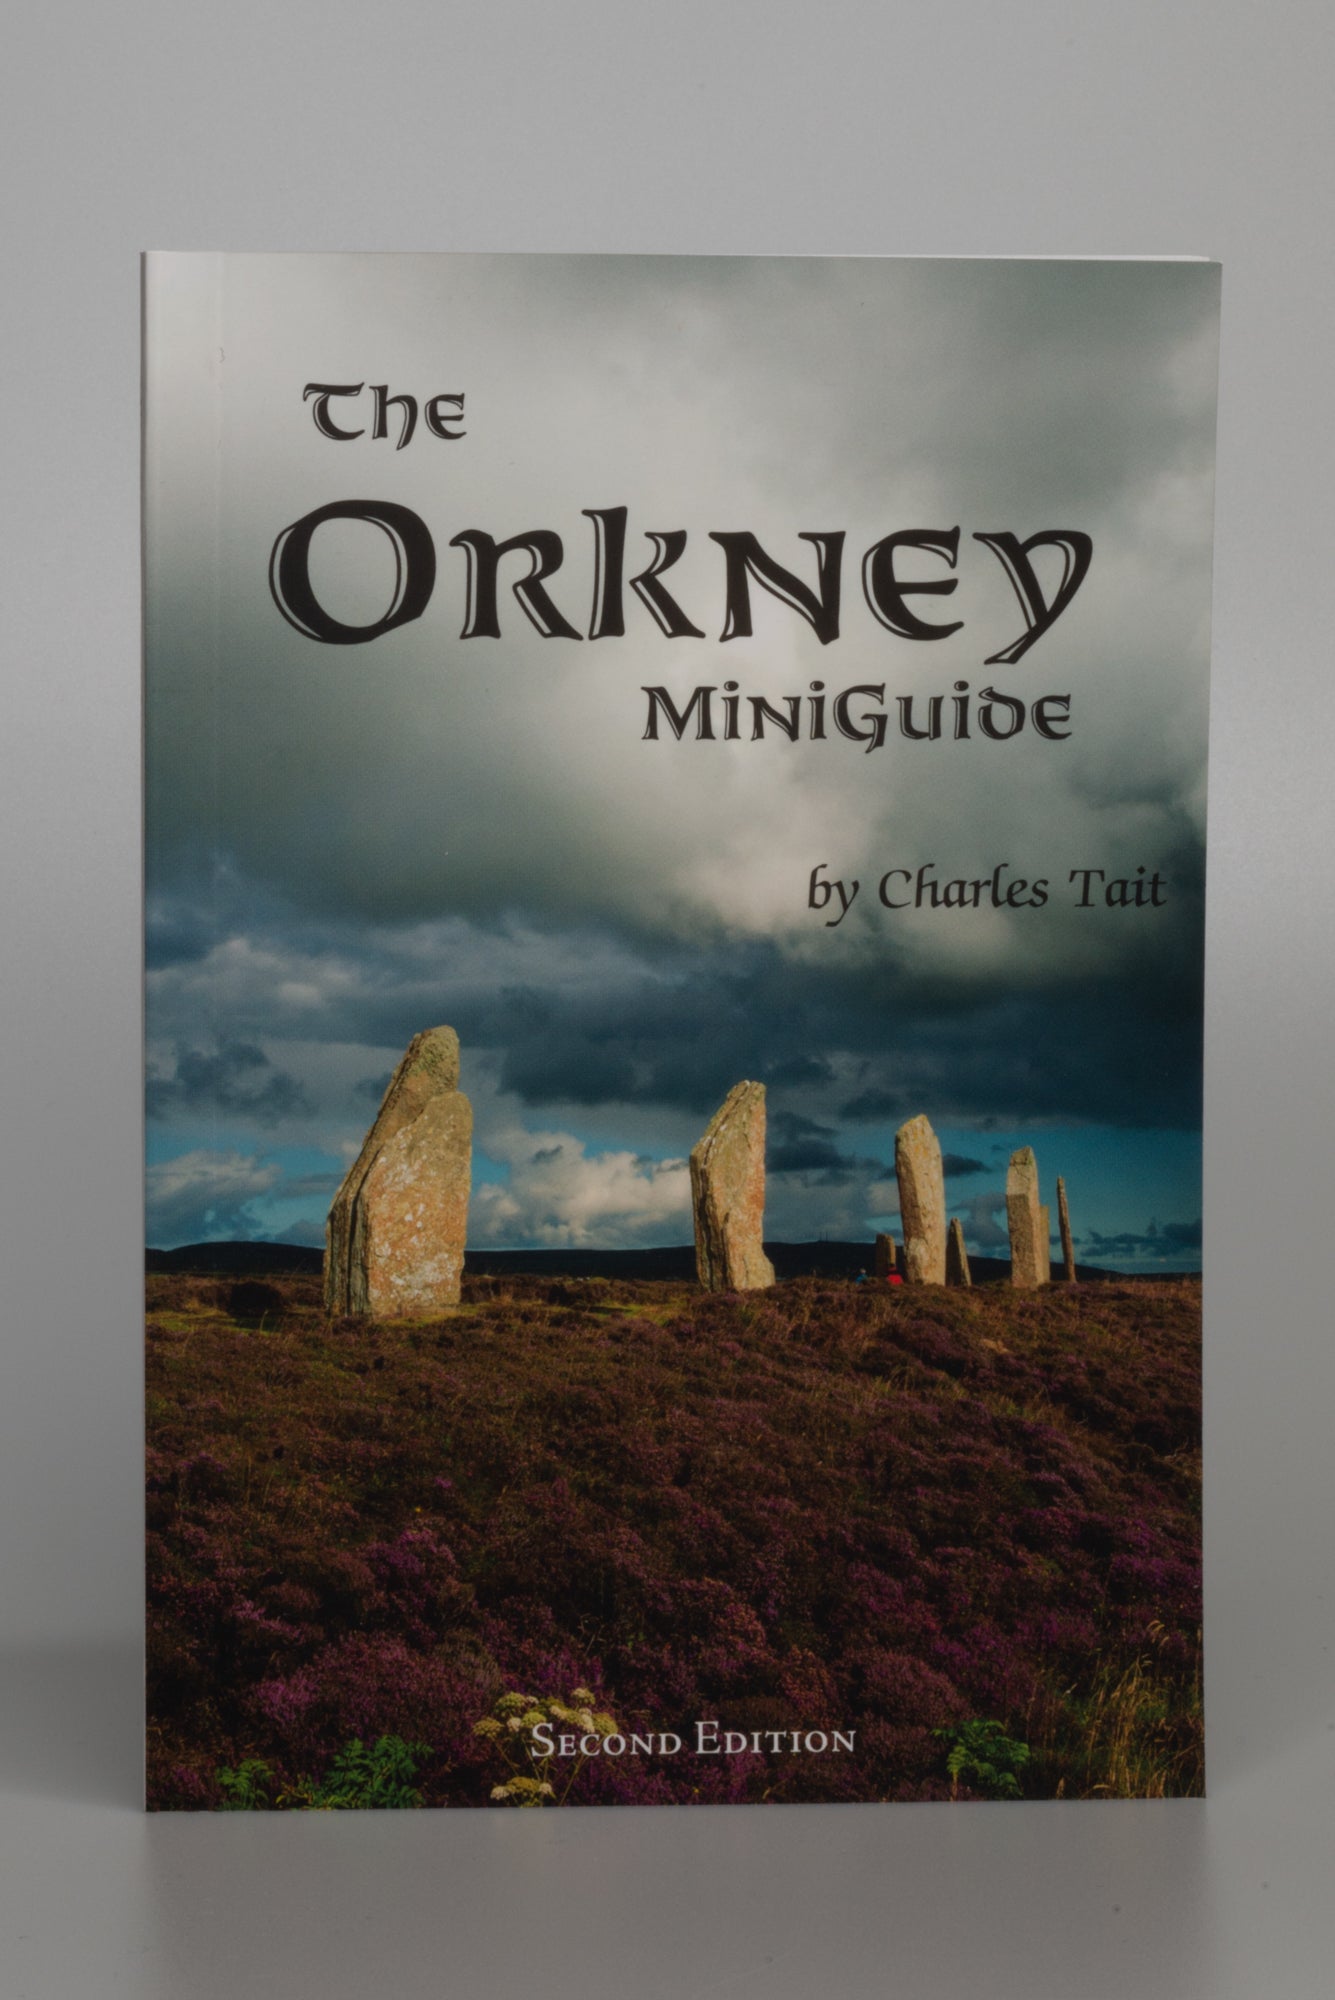 The Orkney MiniGuide